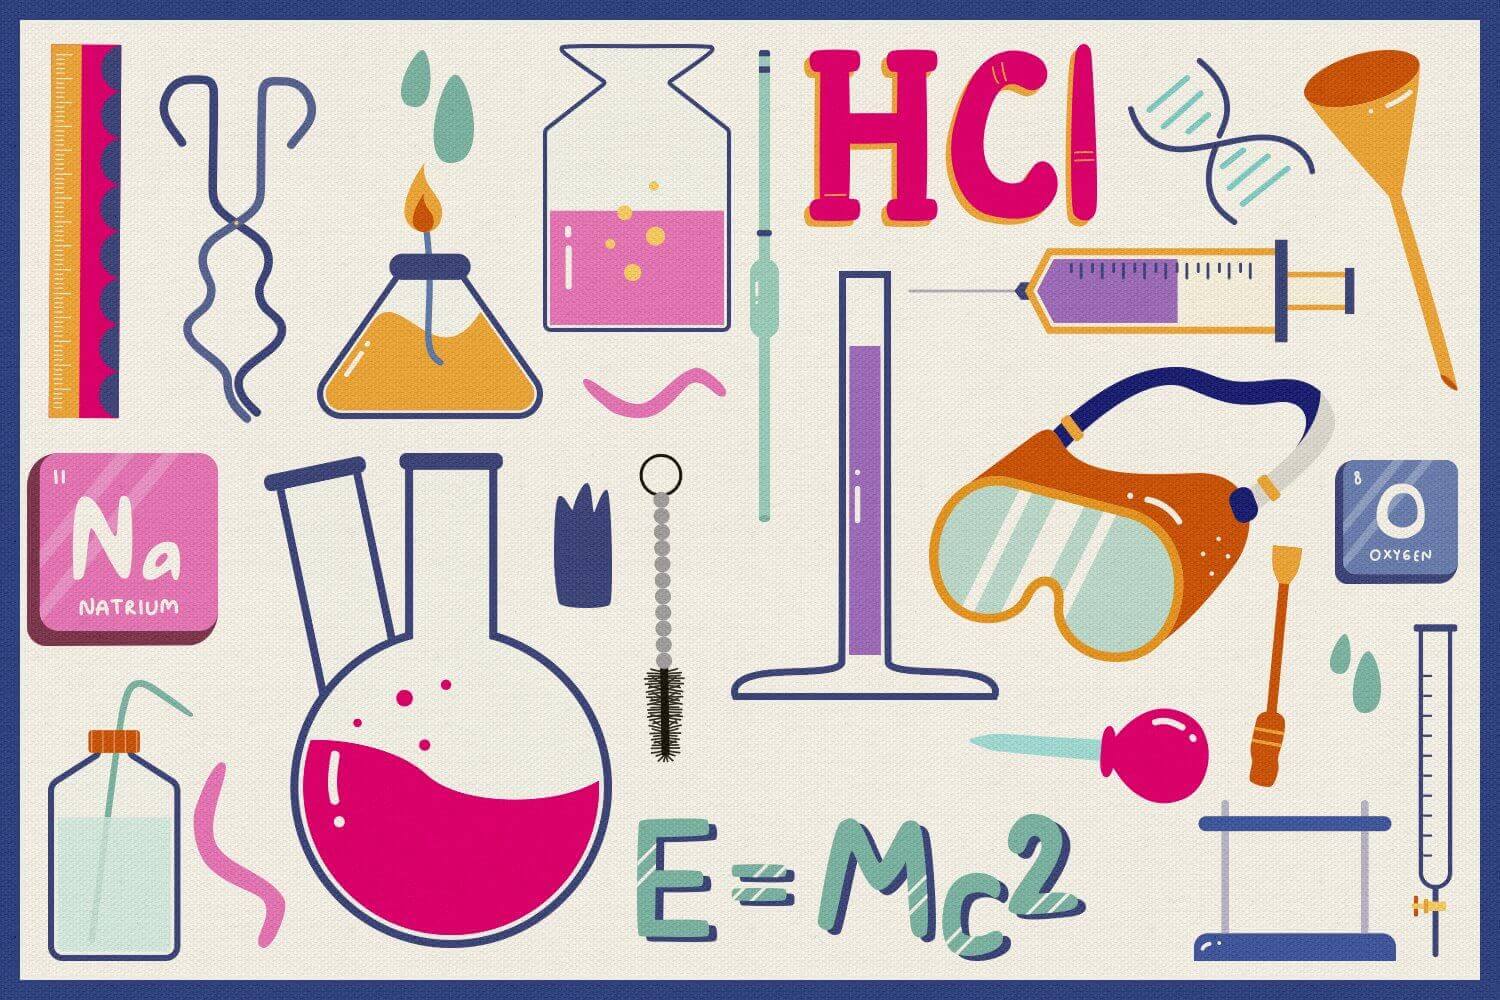 Drawings with chemical solutions and formulas on a light background.